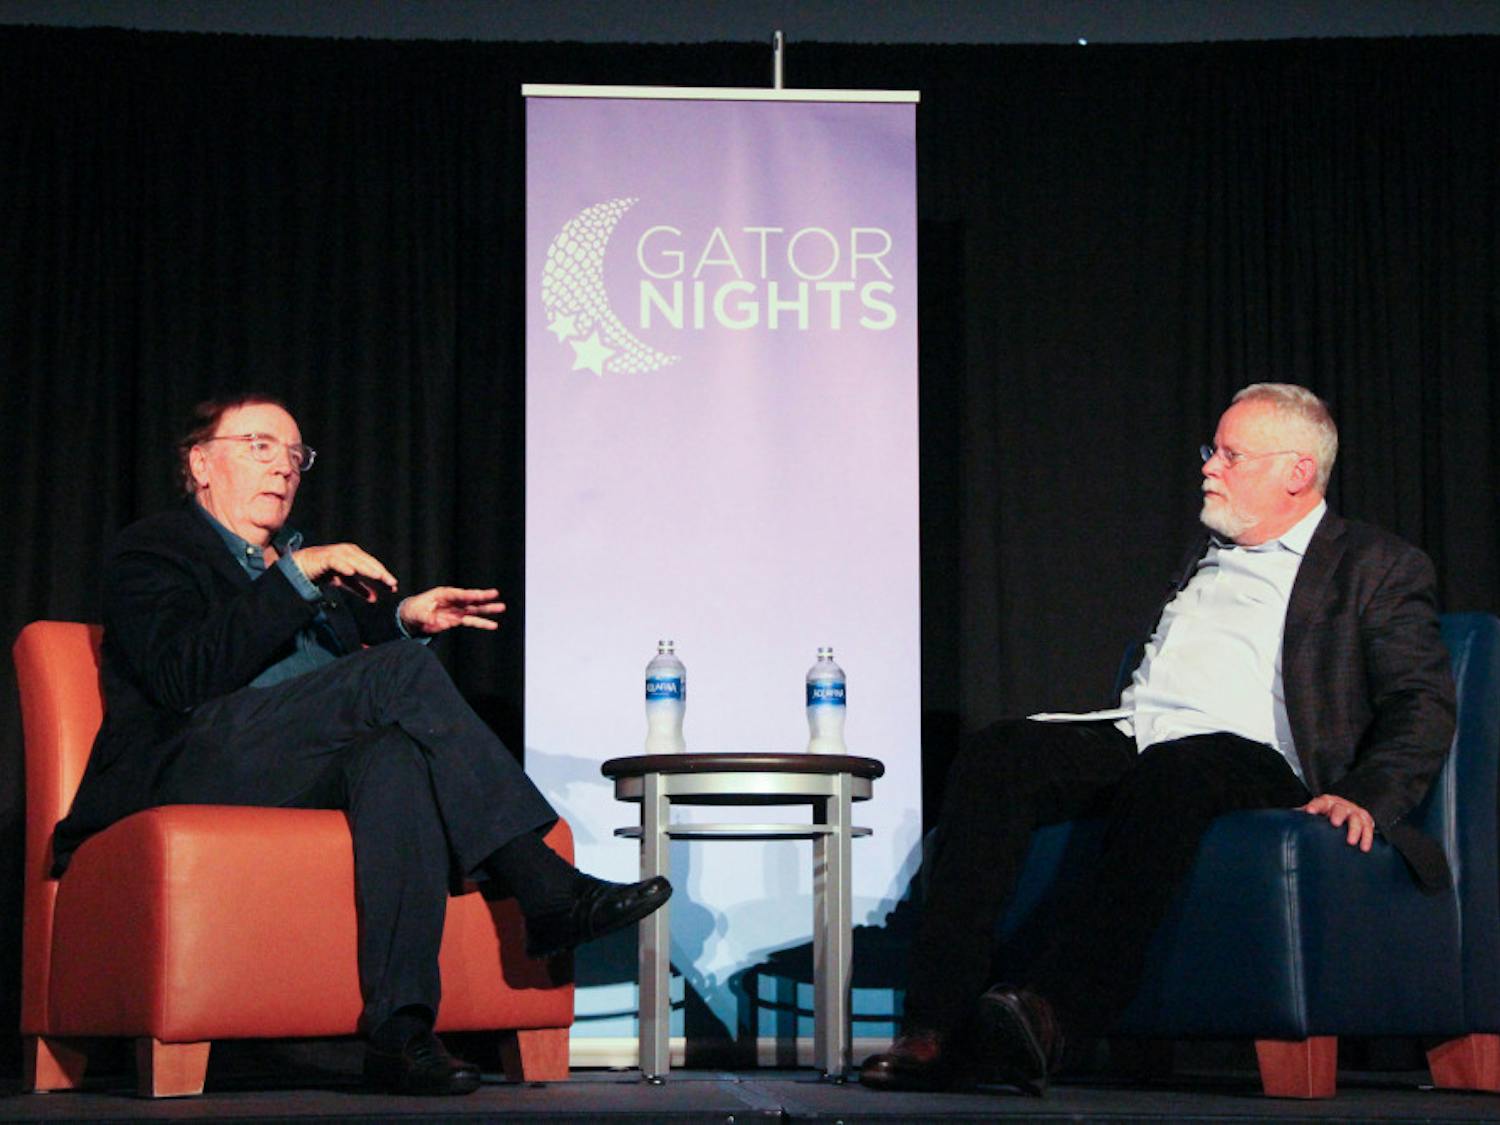 Best-selling author James Patterson being interviewed by best-selling author and UF alumnus Michael Connelly during GatorNights in the Reitz Union on Friday.  